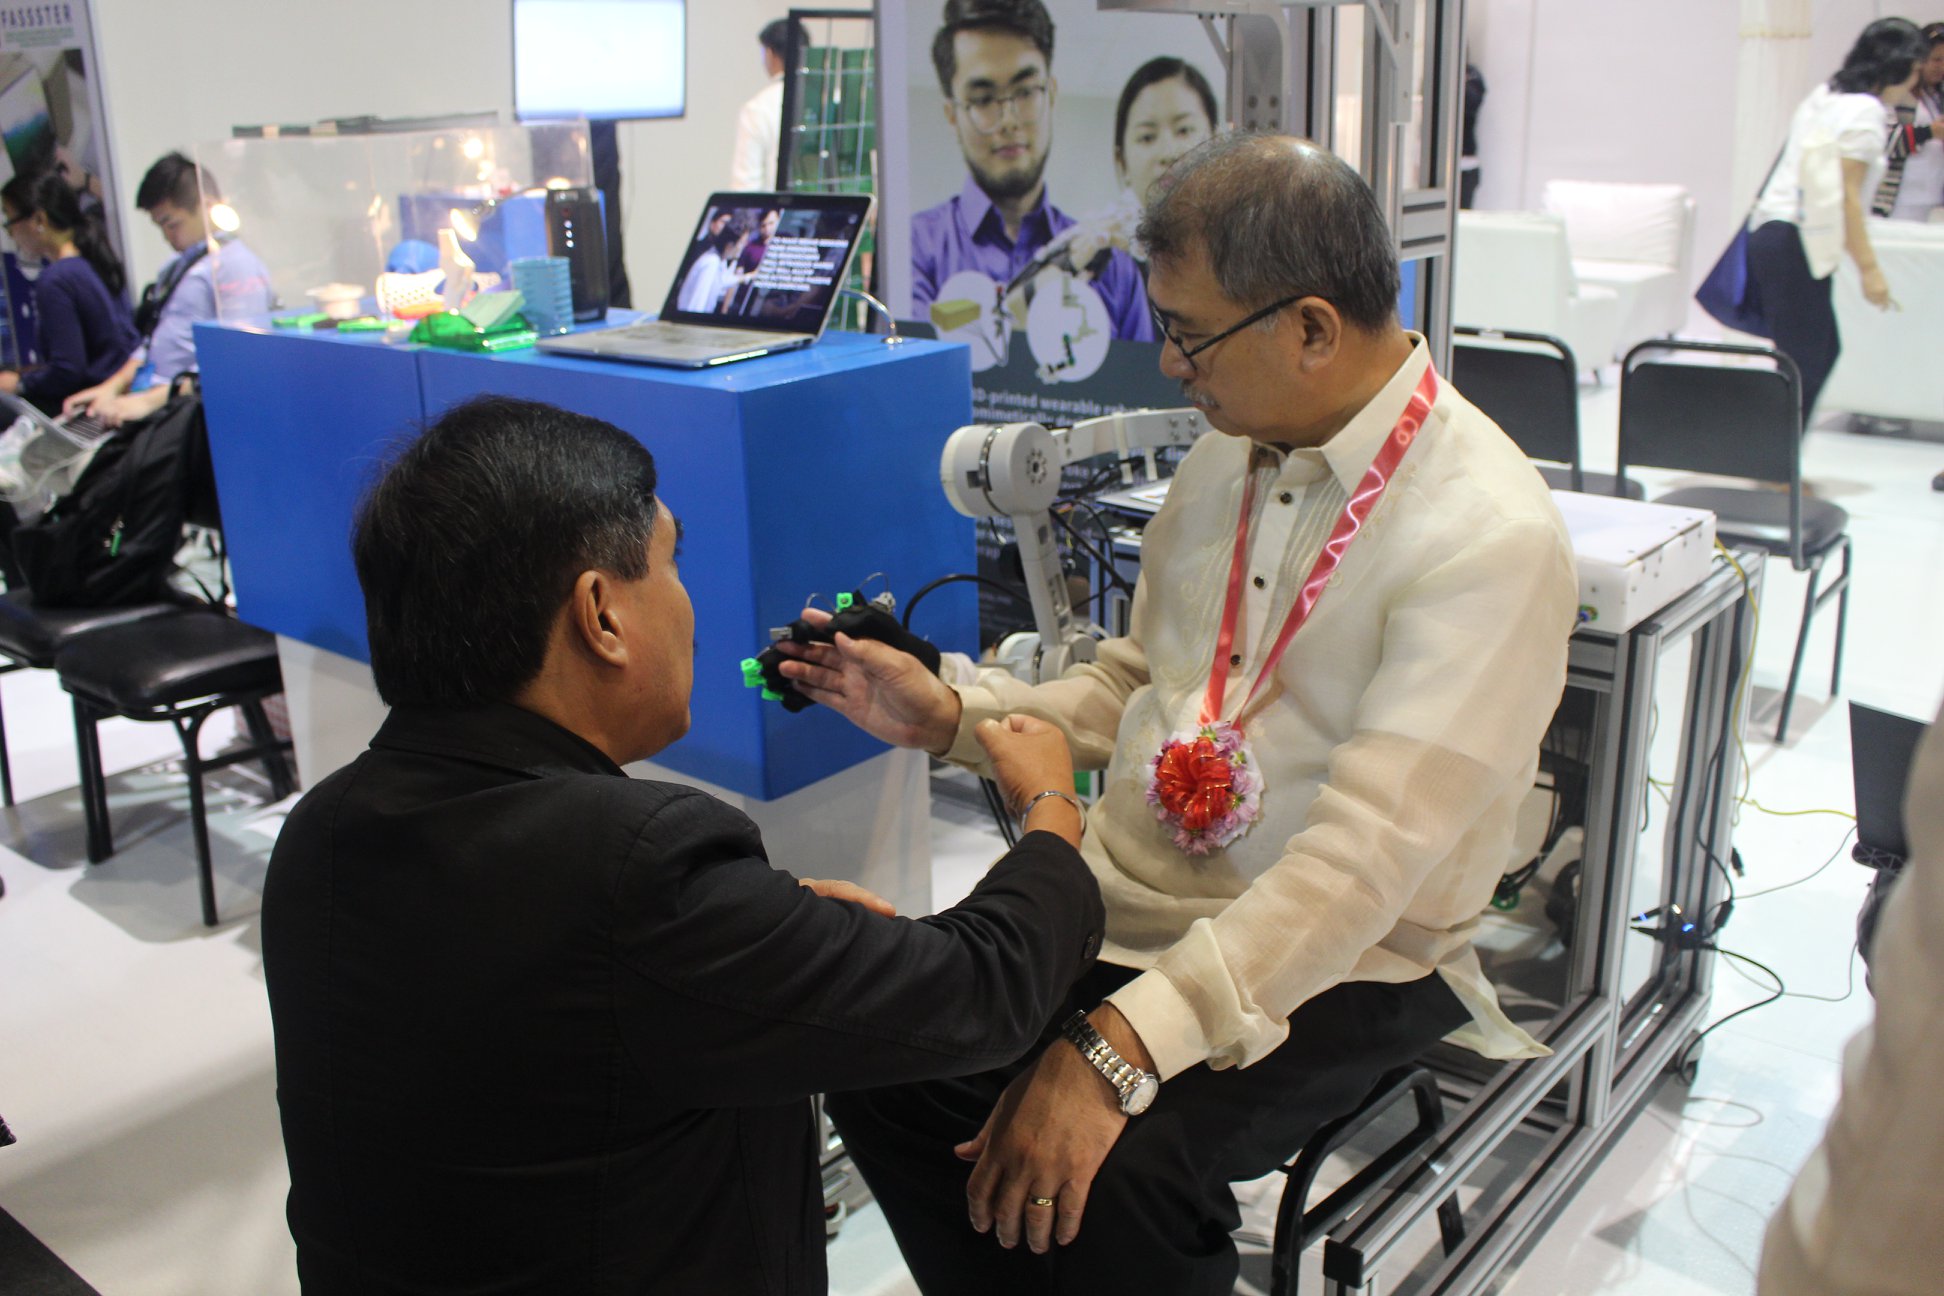 DOST Secretary trying out the Agapay project